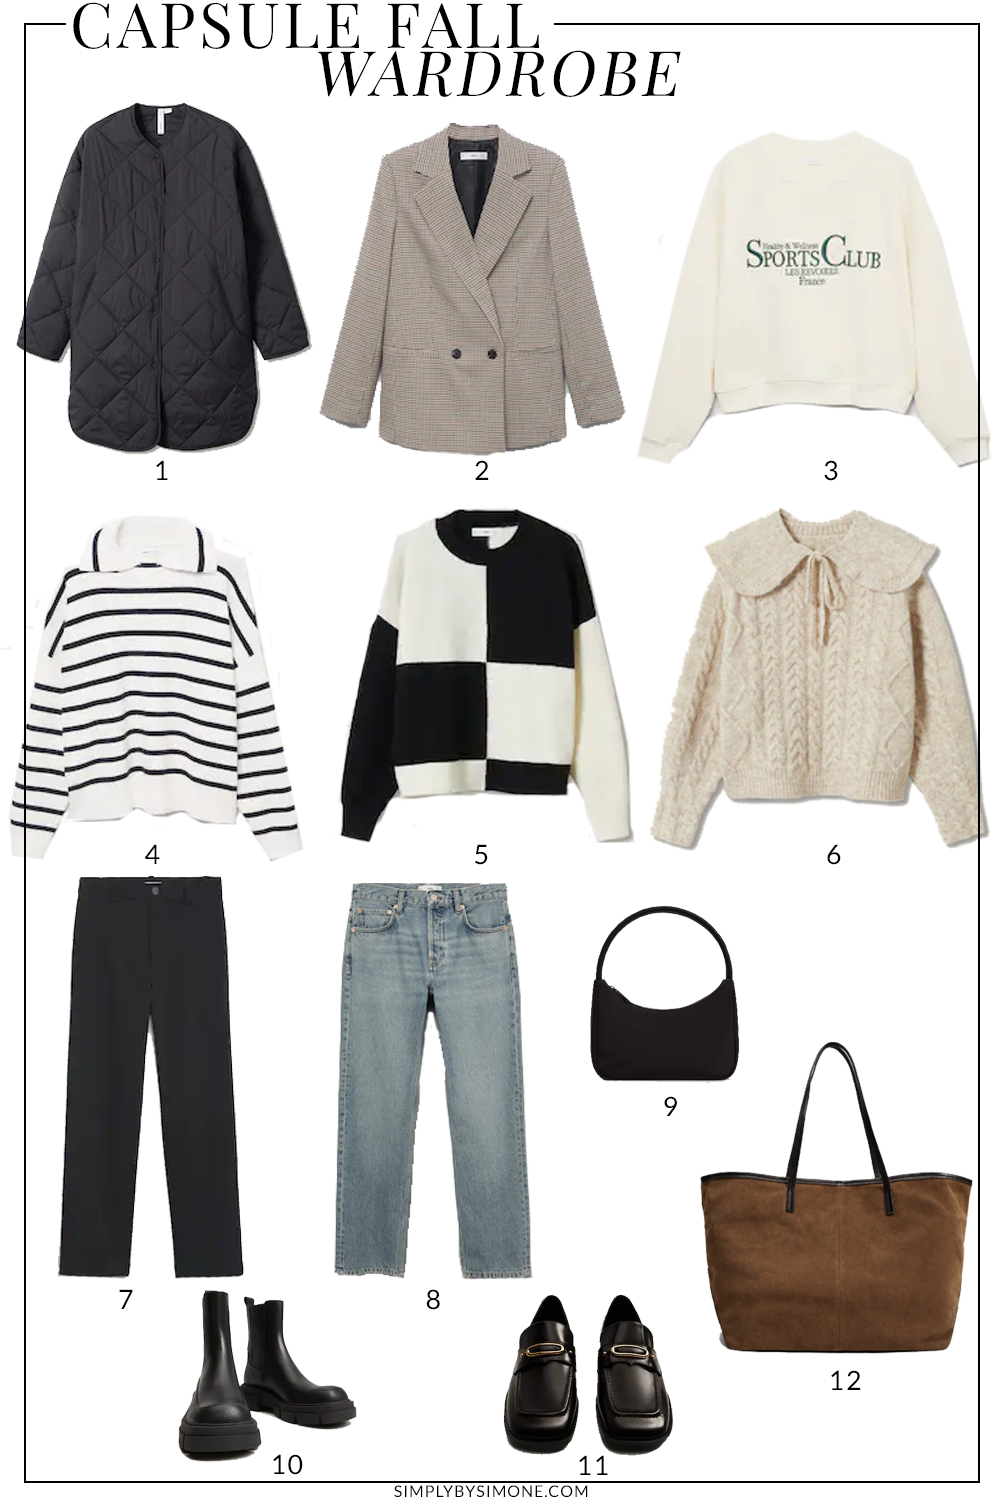 Mango Fall Capsule Wardrobe Items | 12 Pieces, 48 Outfits | How to Build a Capsule Wardrobe | Mango Clothing Fall Clothes | Outfit Inspiration | 48 Fall Weather Outfit Ideas | Fall Vacation Packing Guide | Mango Clothing Fall Capsule Wardrobe| What To Wear this Fall 2021 | Simply by Simone | Conscious Mango Fall Capsule Wardrobe | What To Wear This Fall 2021 | 12 Pieces